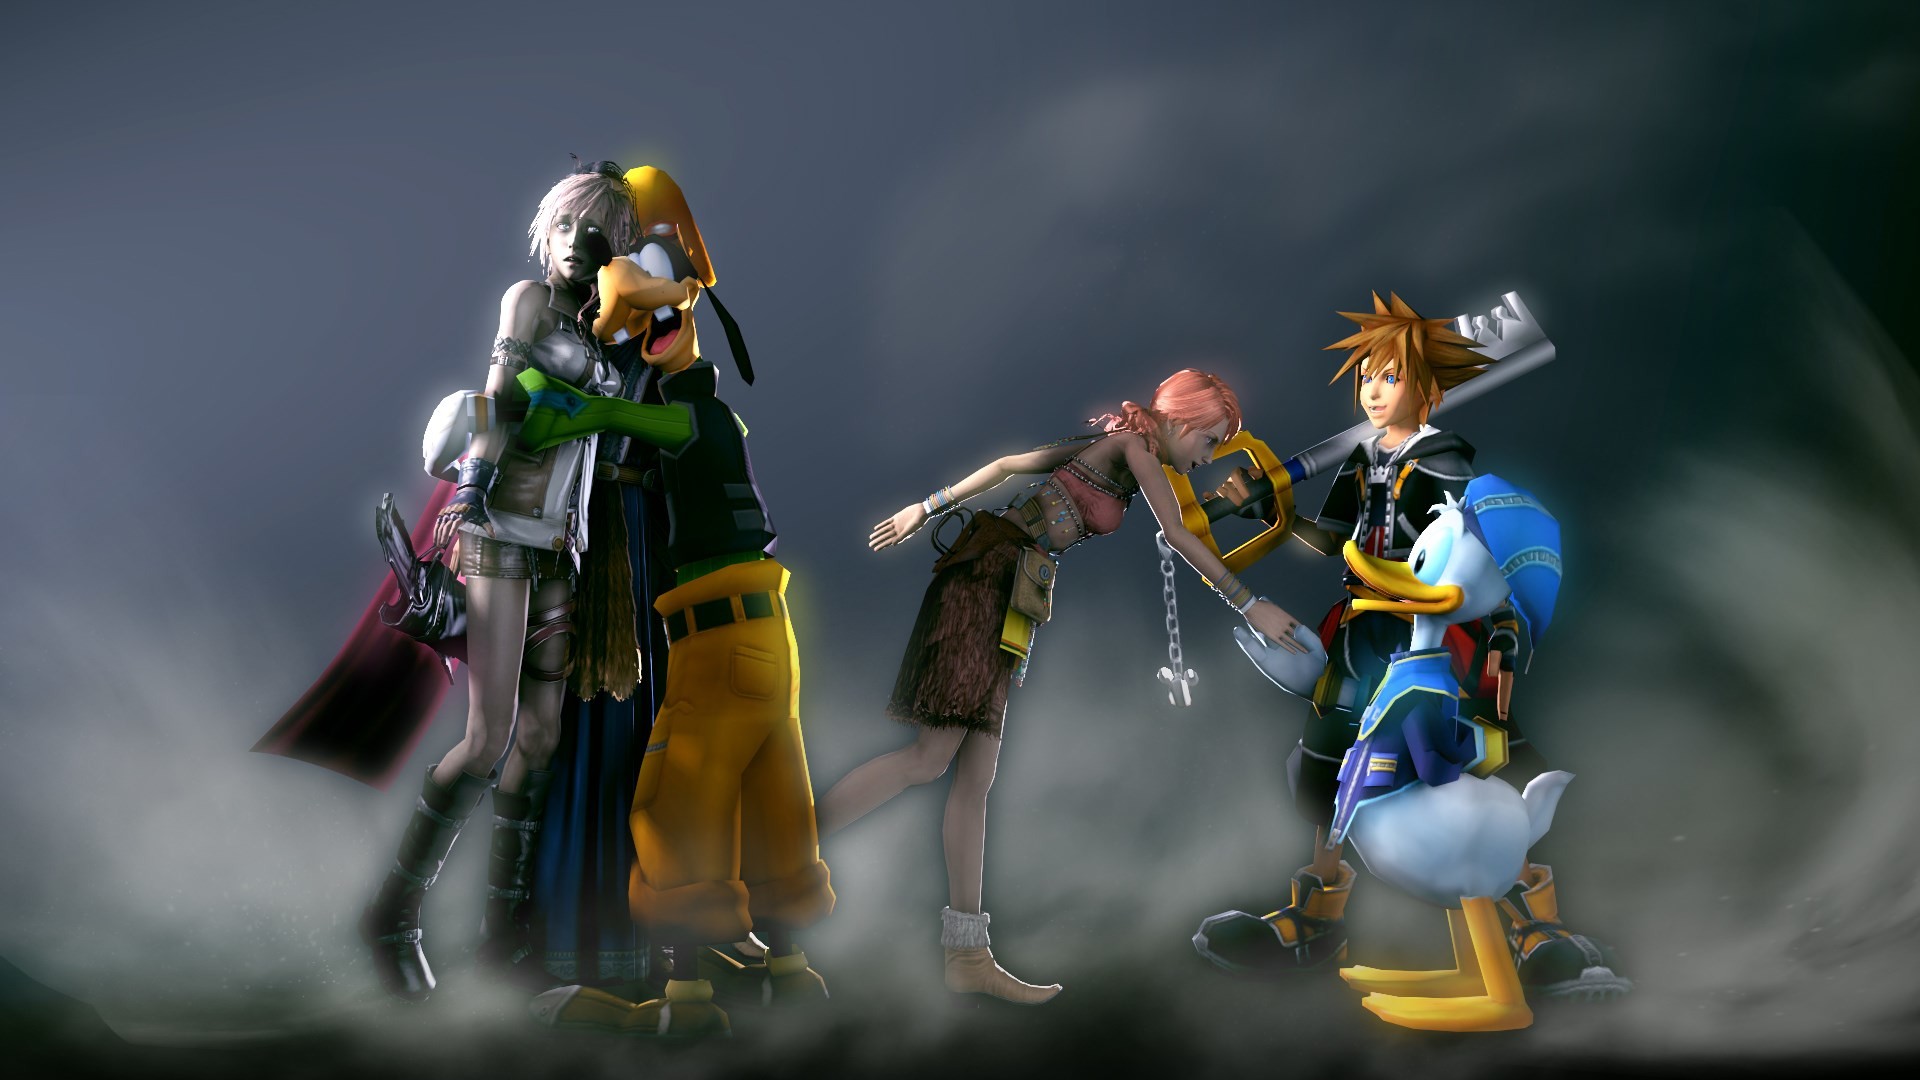 1920x1080 kingdom hearts picture images